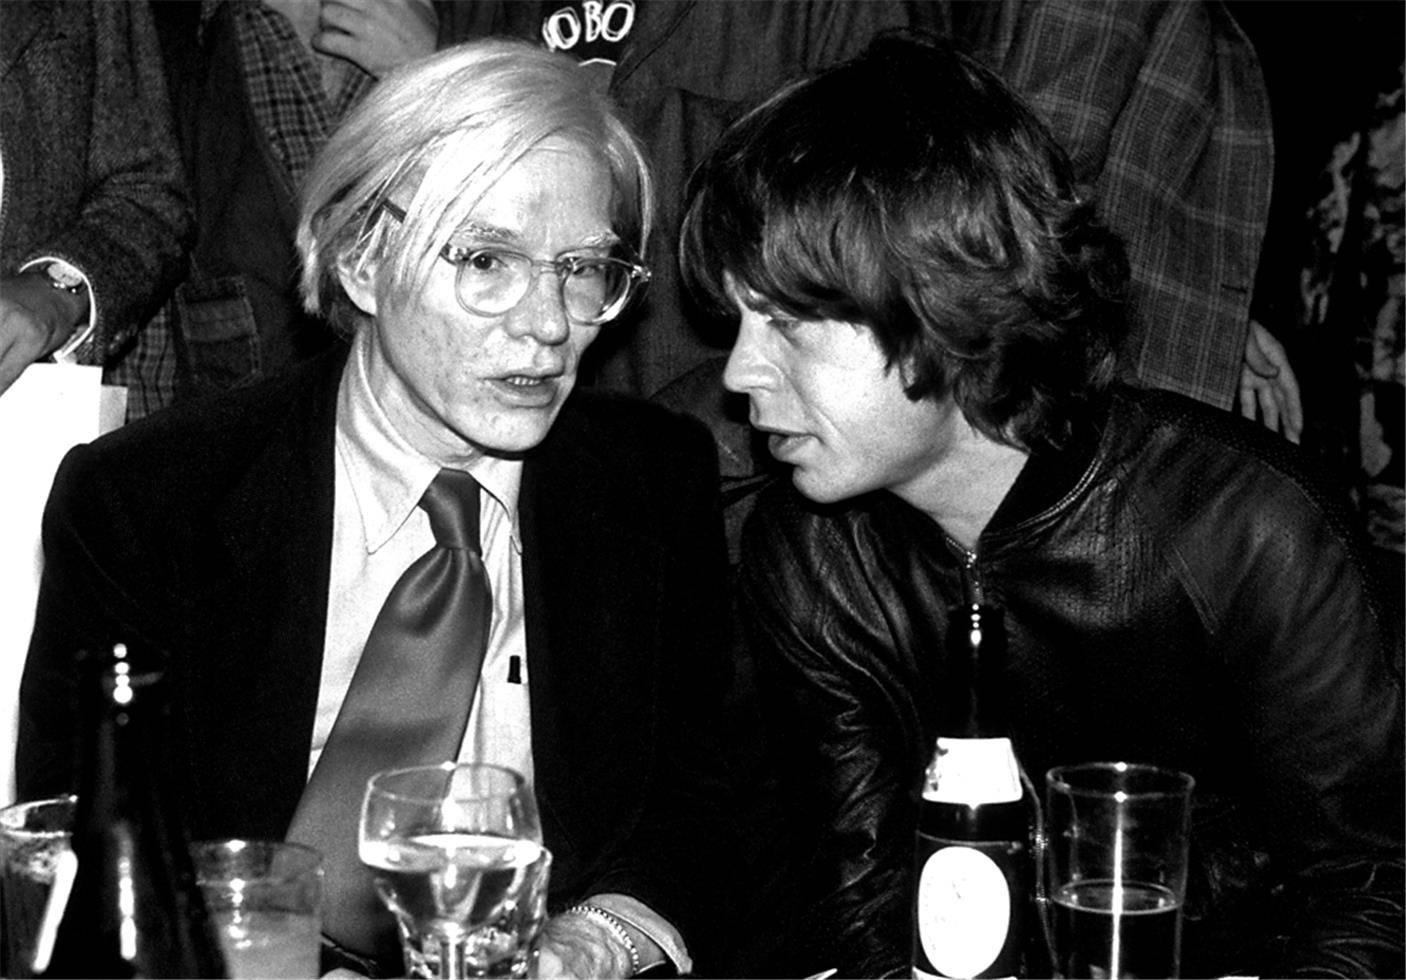 Black and White Photograph Richard E. Aaron - Andy Warhol et Mick Jagger, NYC, 1977